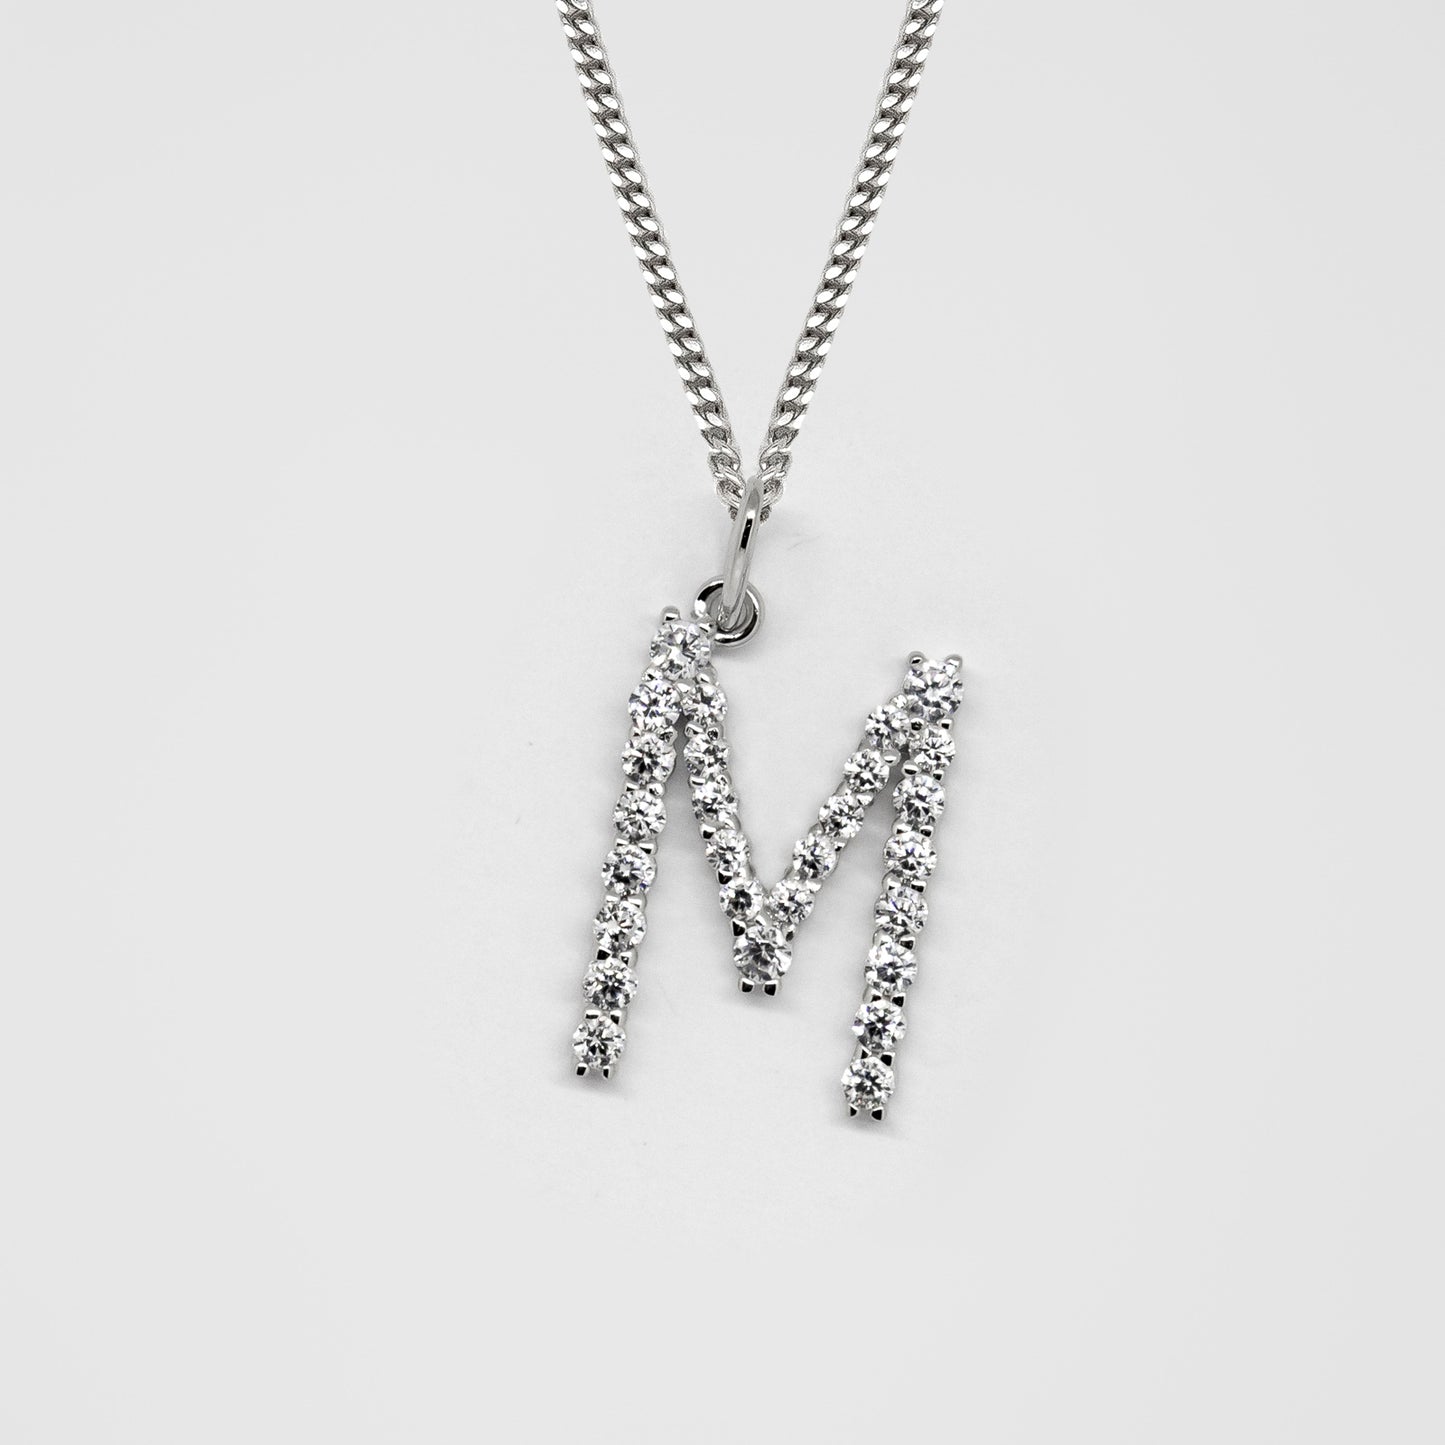 Silver 925 Initial Necklace - M